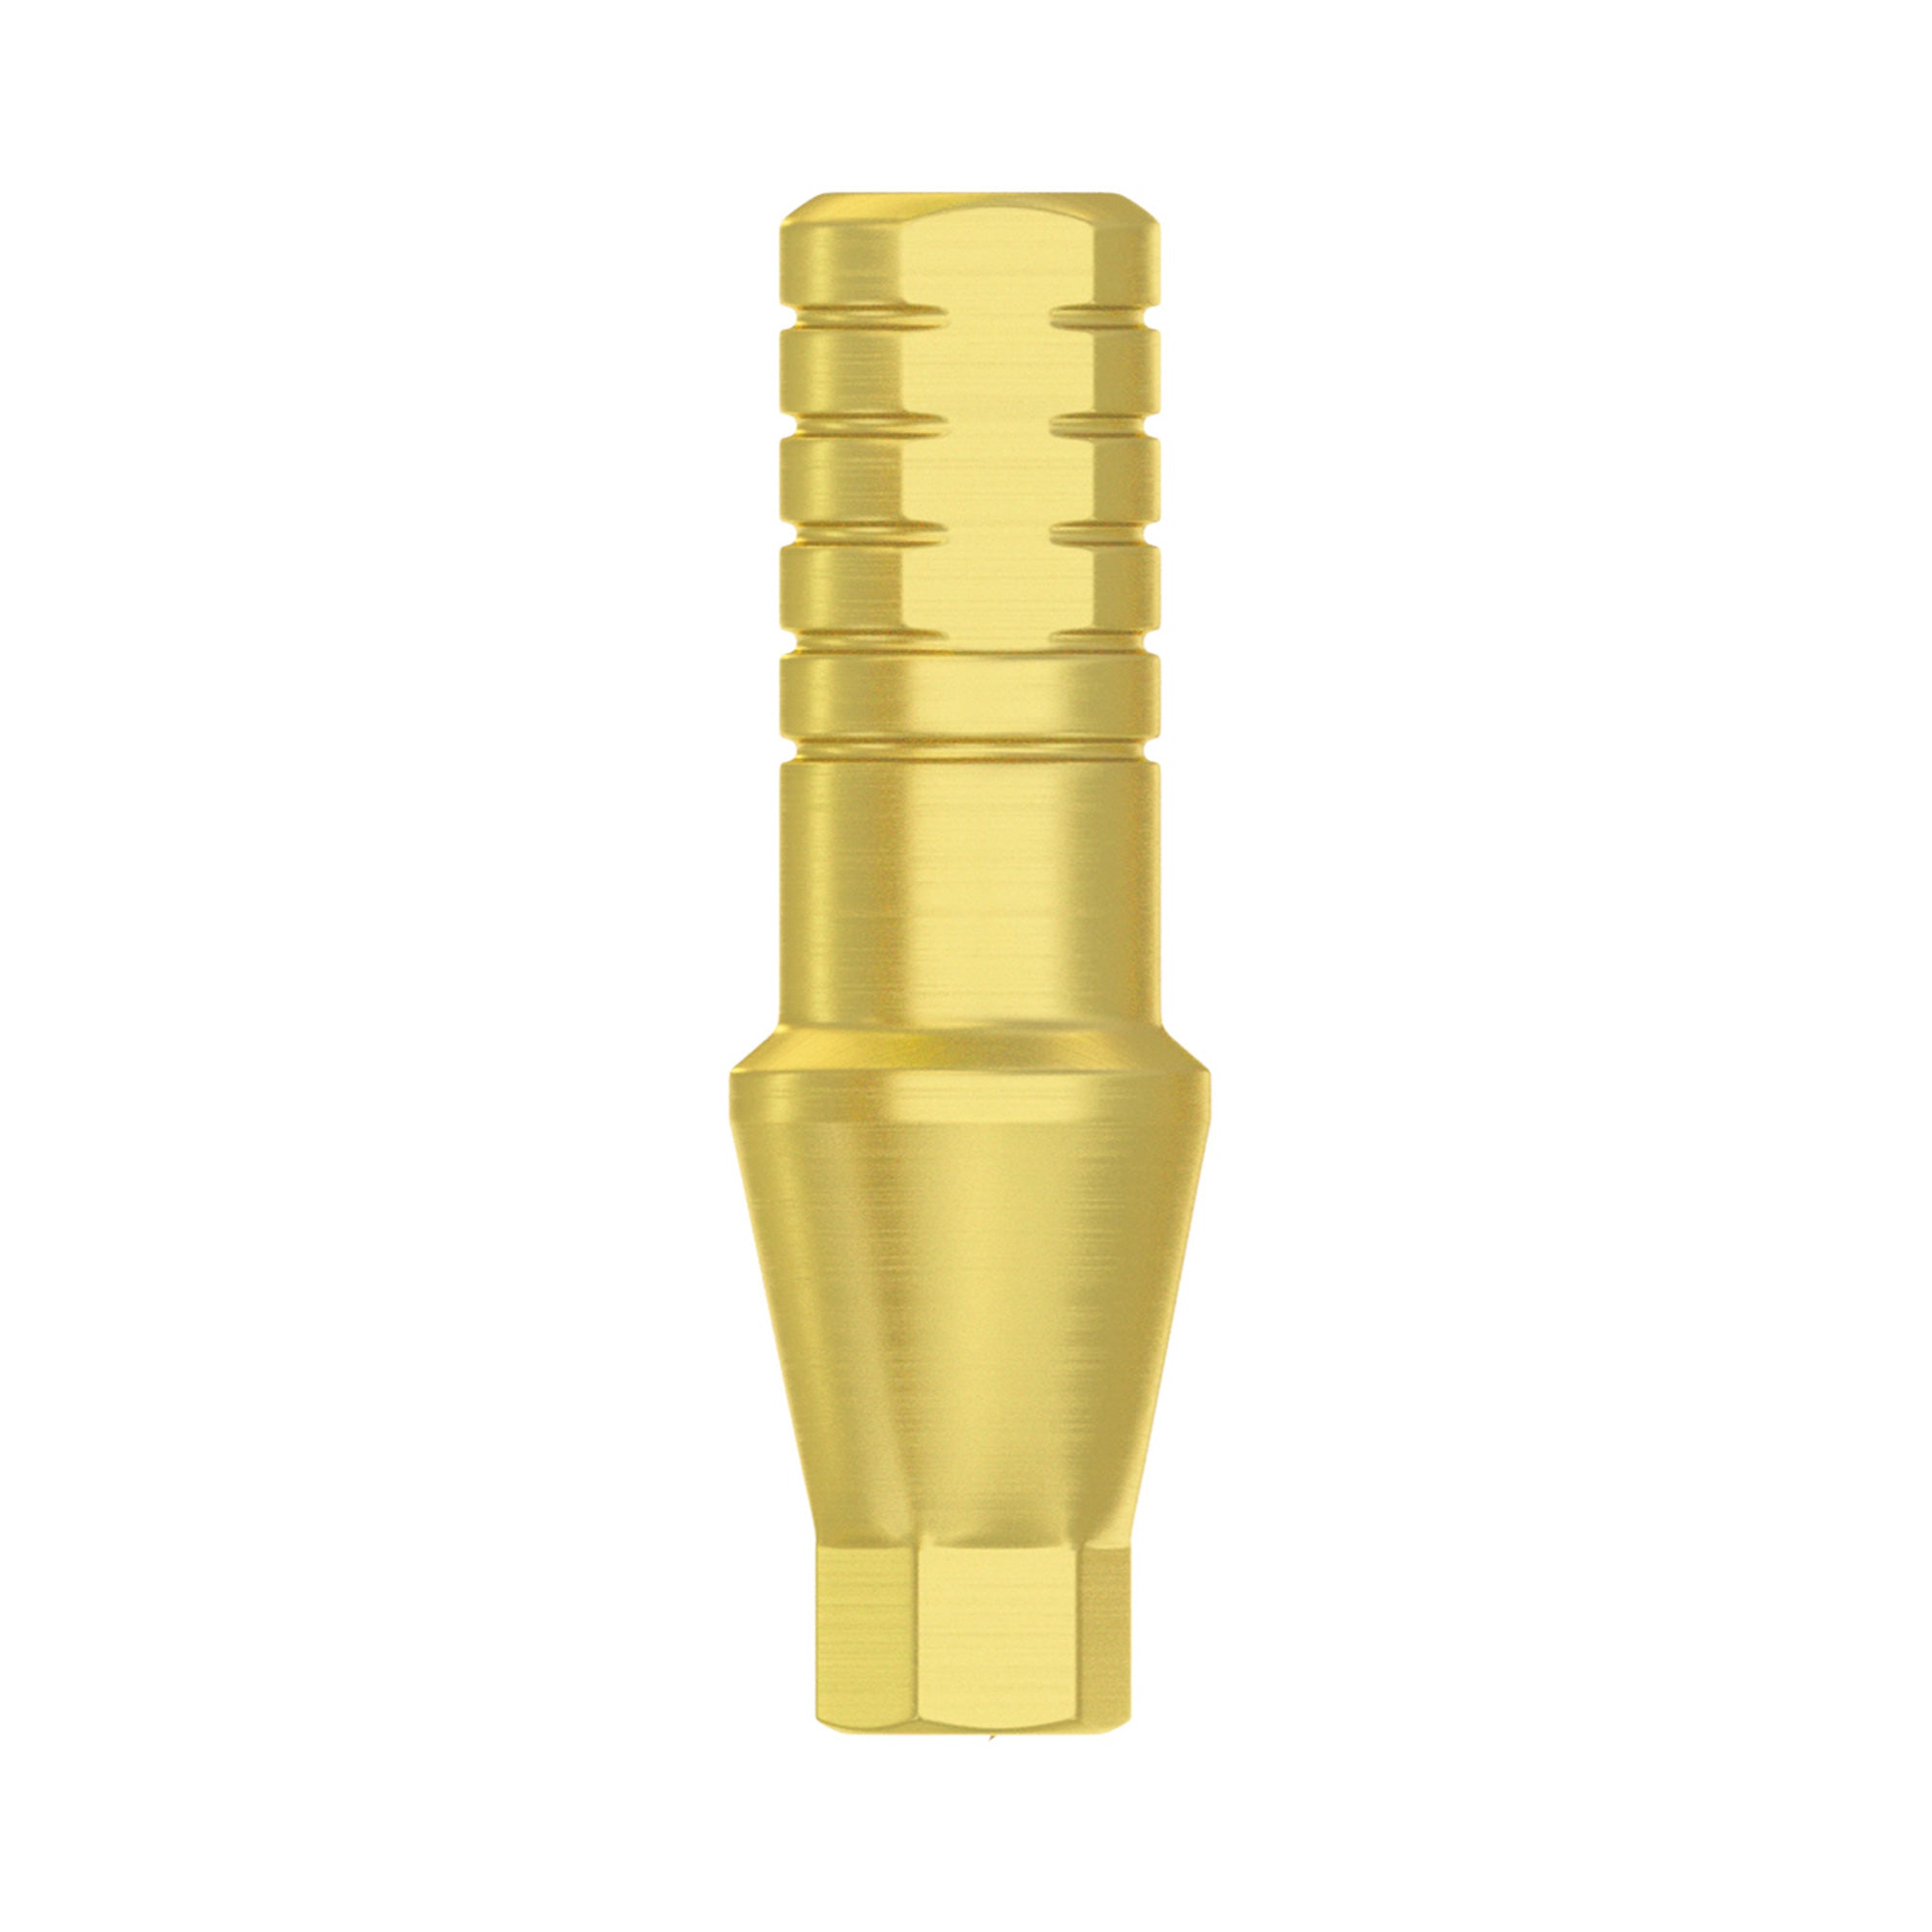 DSI Shoulder Straight Abutment - Conical Connection RP Ø4.3-5.0mm